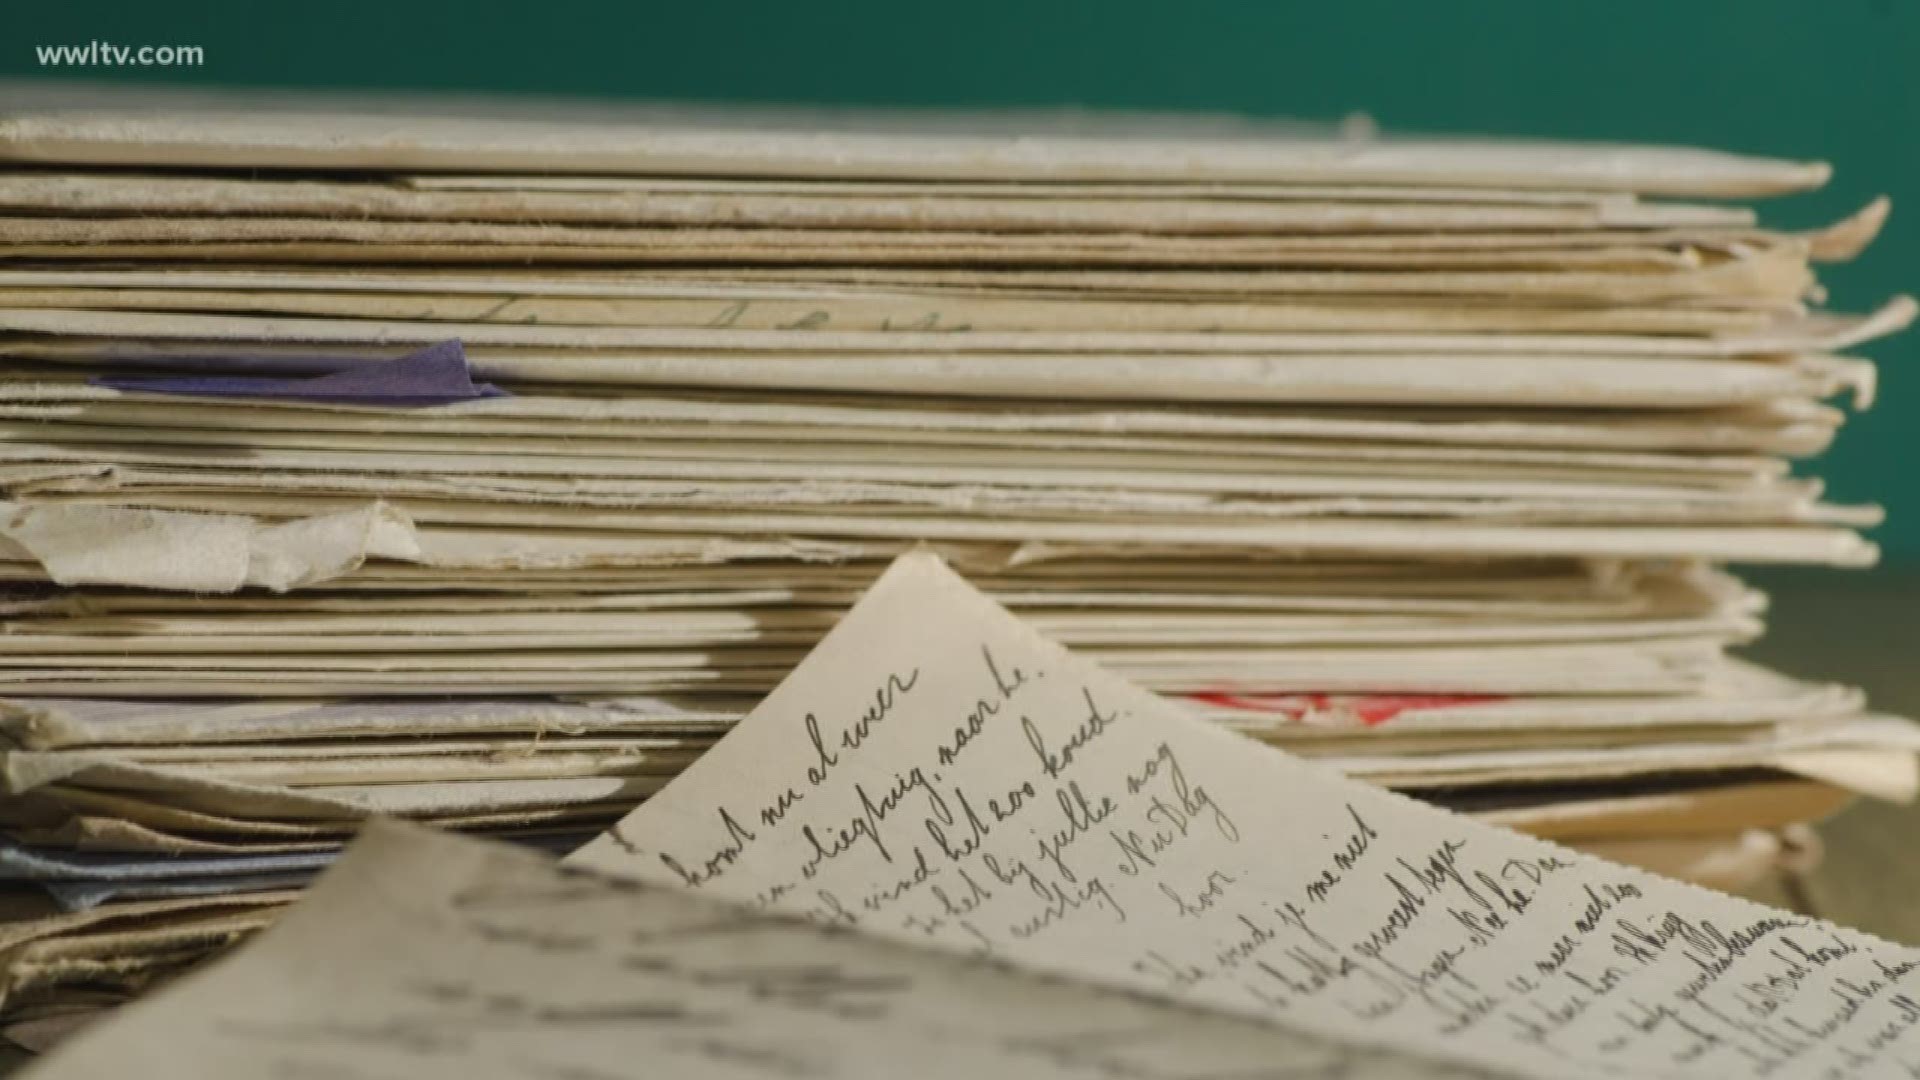 Think of it on a more personal level. When was the last time you got a handwritten letter, or better yet, sent one?